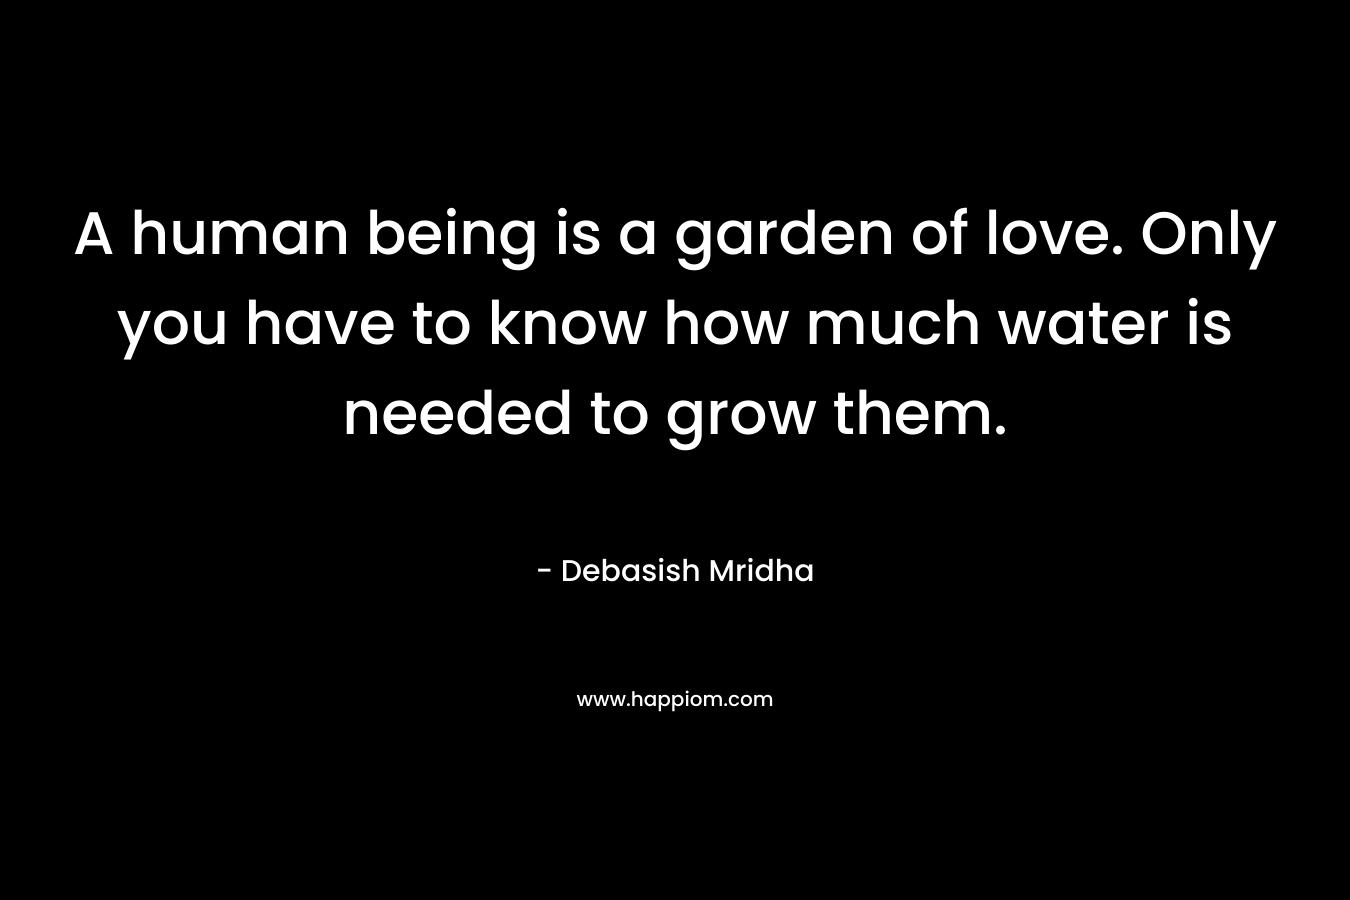 A human being is a garden of love. Only you have to know how much water is needed to grow them.